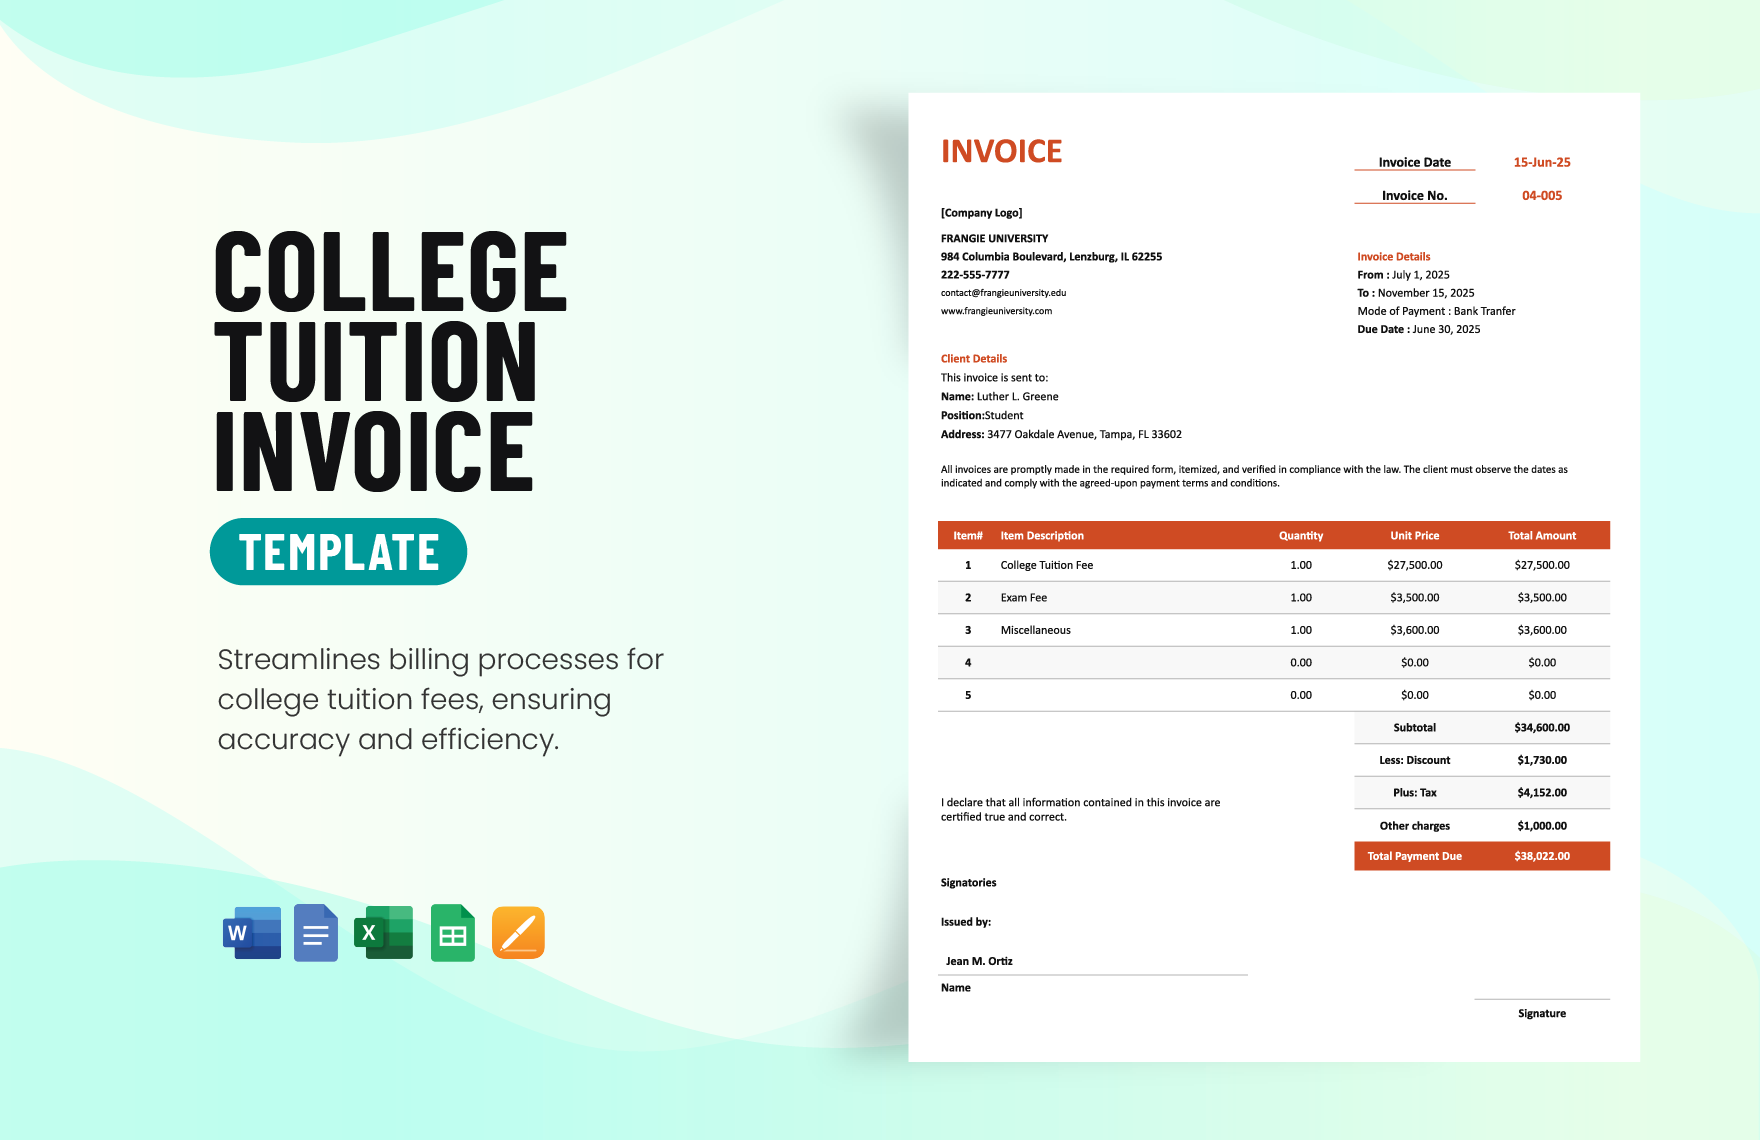 College Tuition Invoice Template in Word, Google Docs, Excel, Google Sheets, Apple Pages